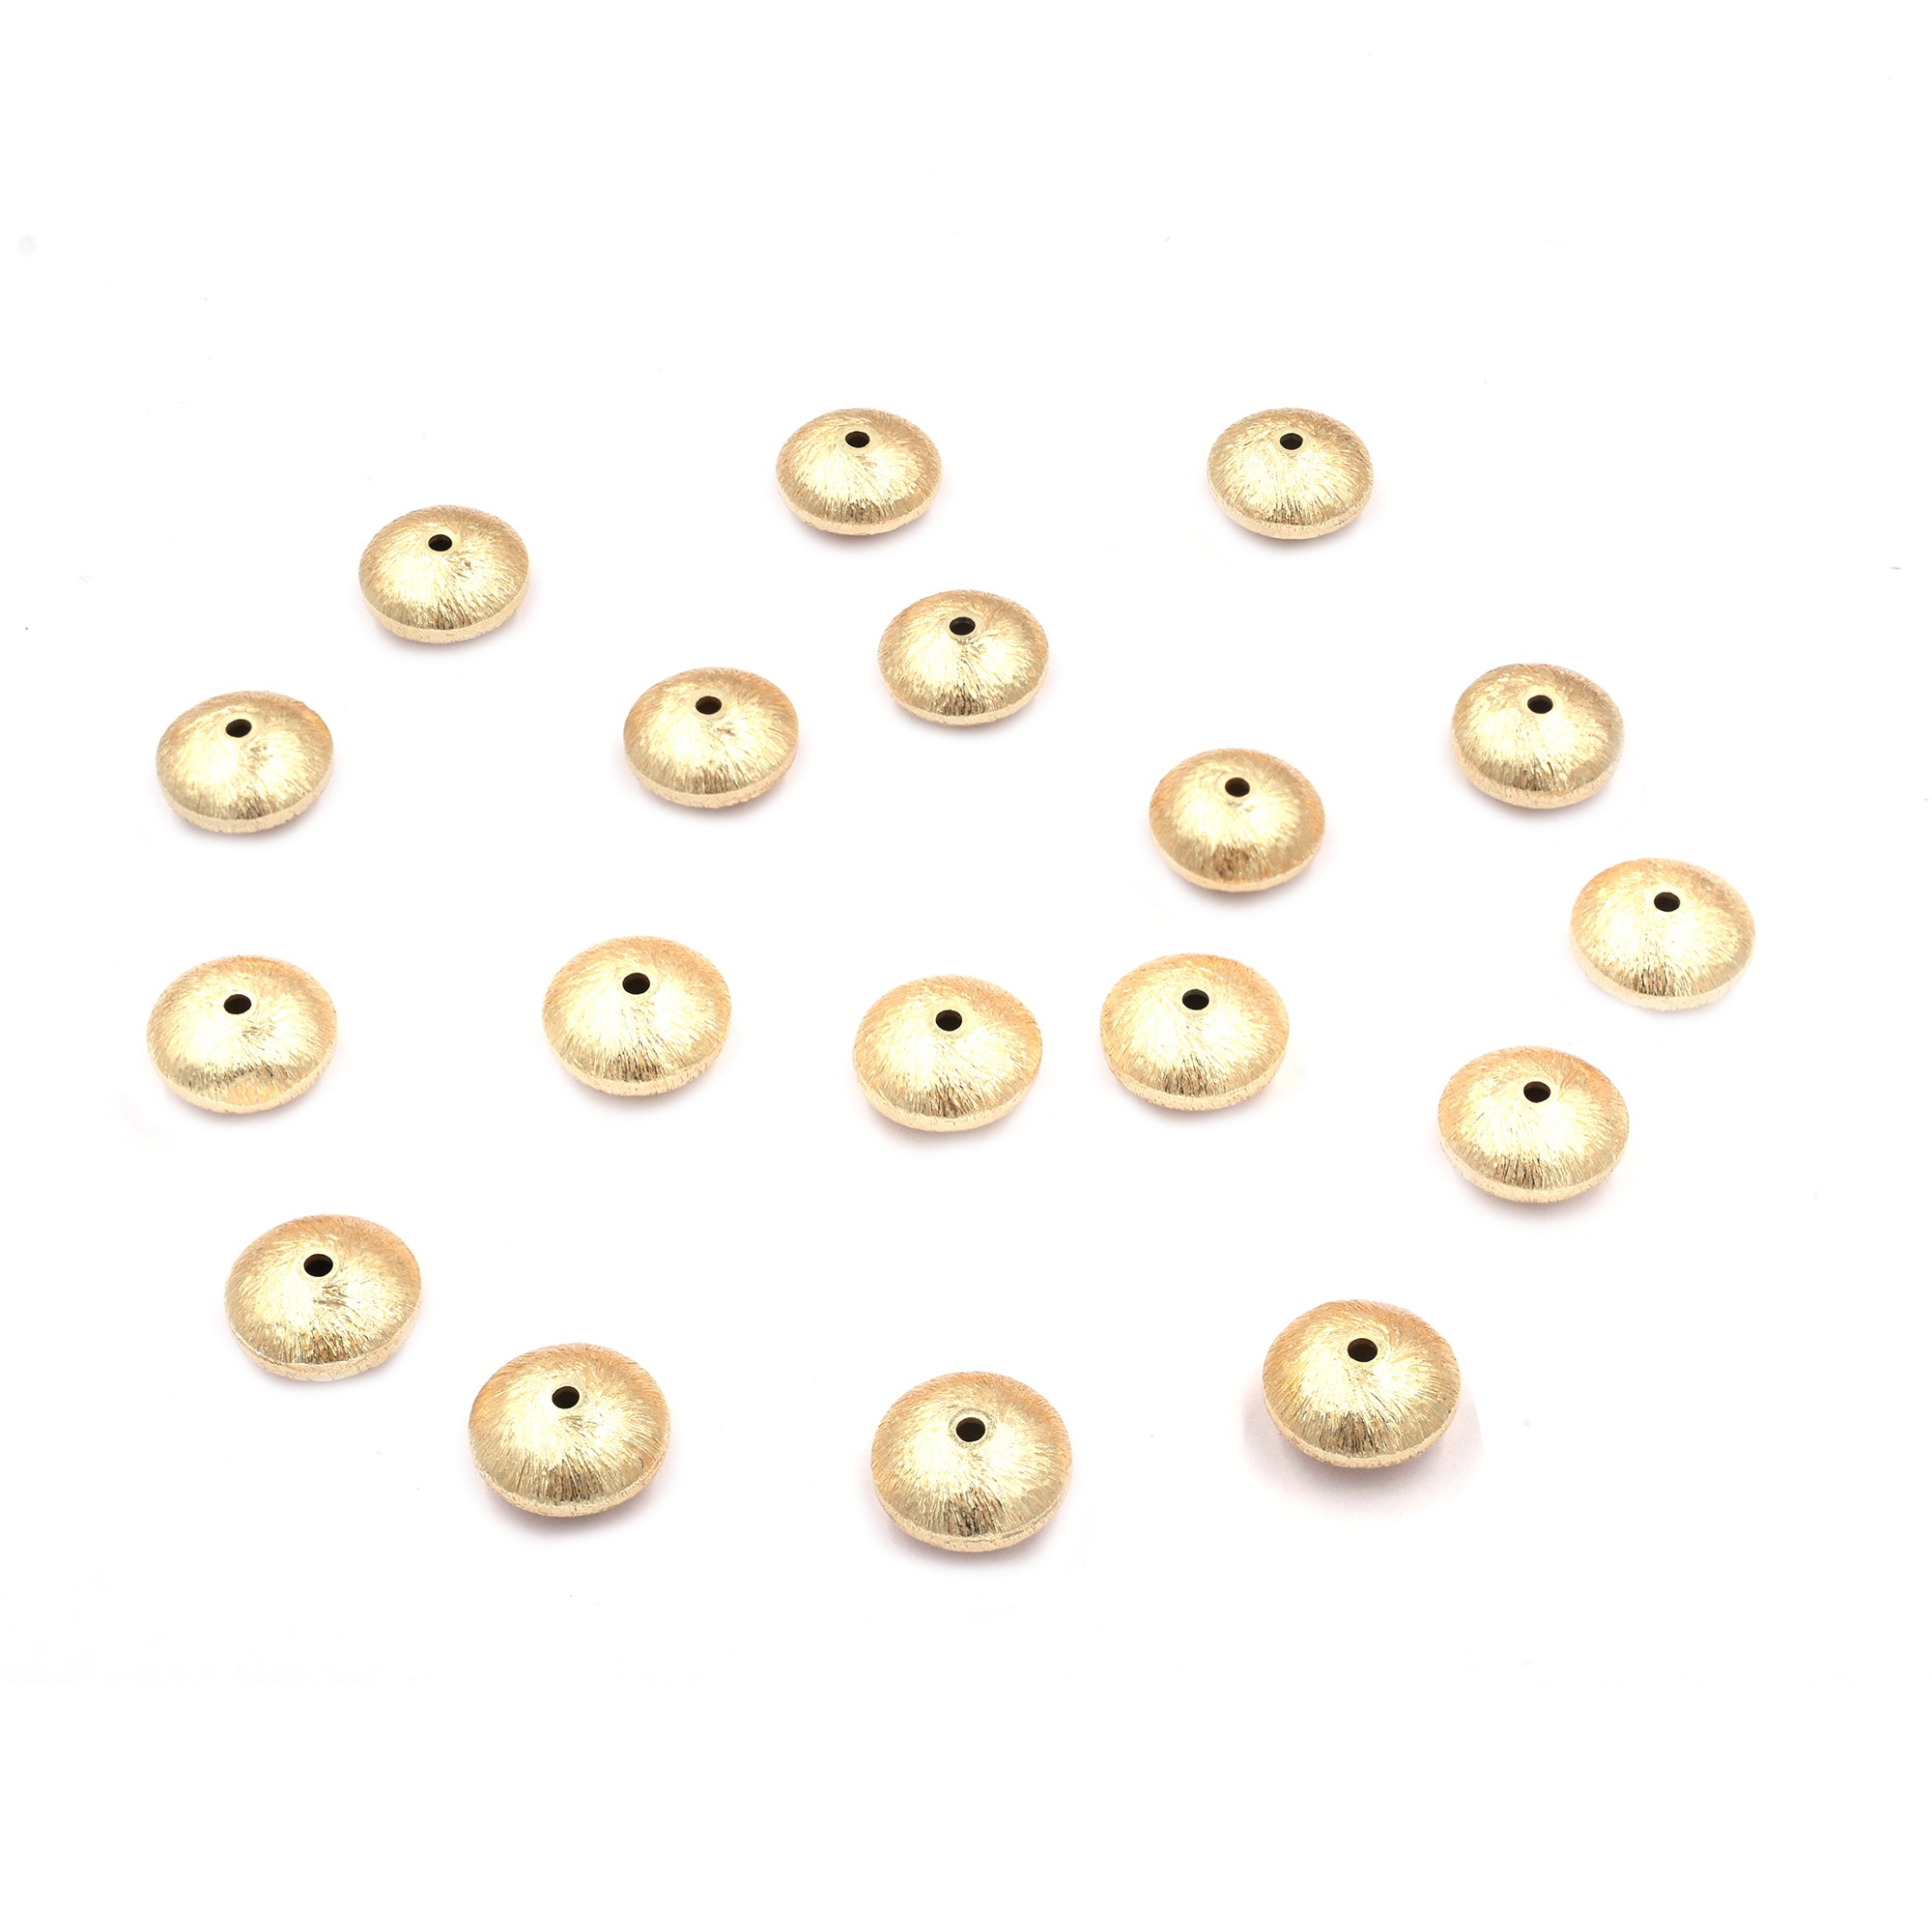 30 Pcs 10mm Spacer Brushed Matte Finish Beads Gold Plated Copper